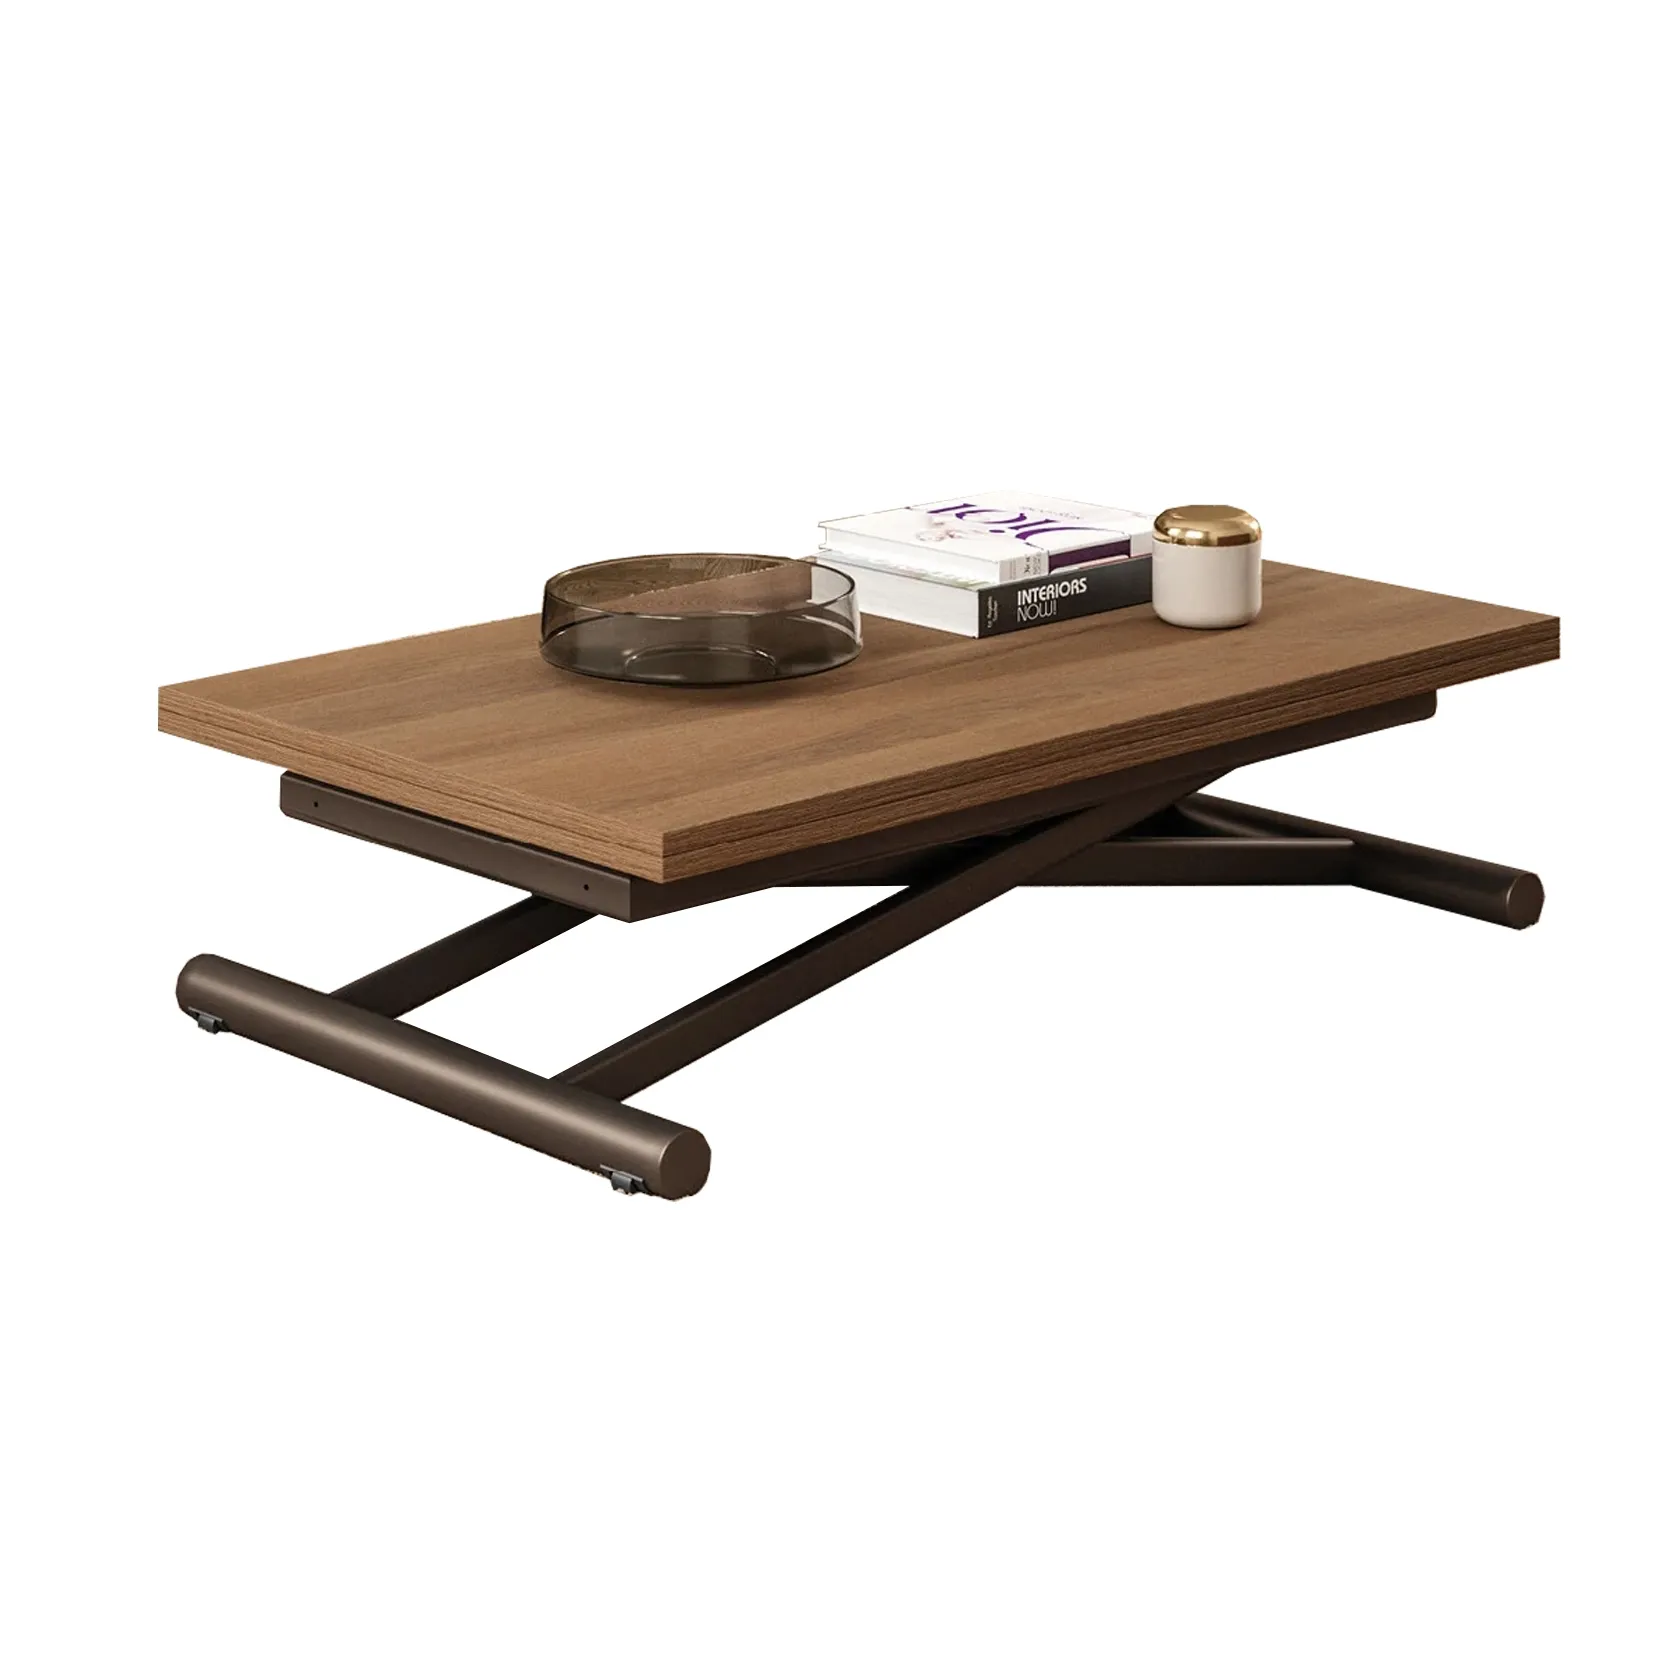 https://www.barthome.shop/115550-thickbox_default/transformable-table-easy-line-fast-et81.jpg